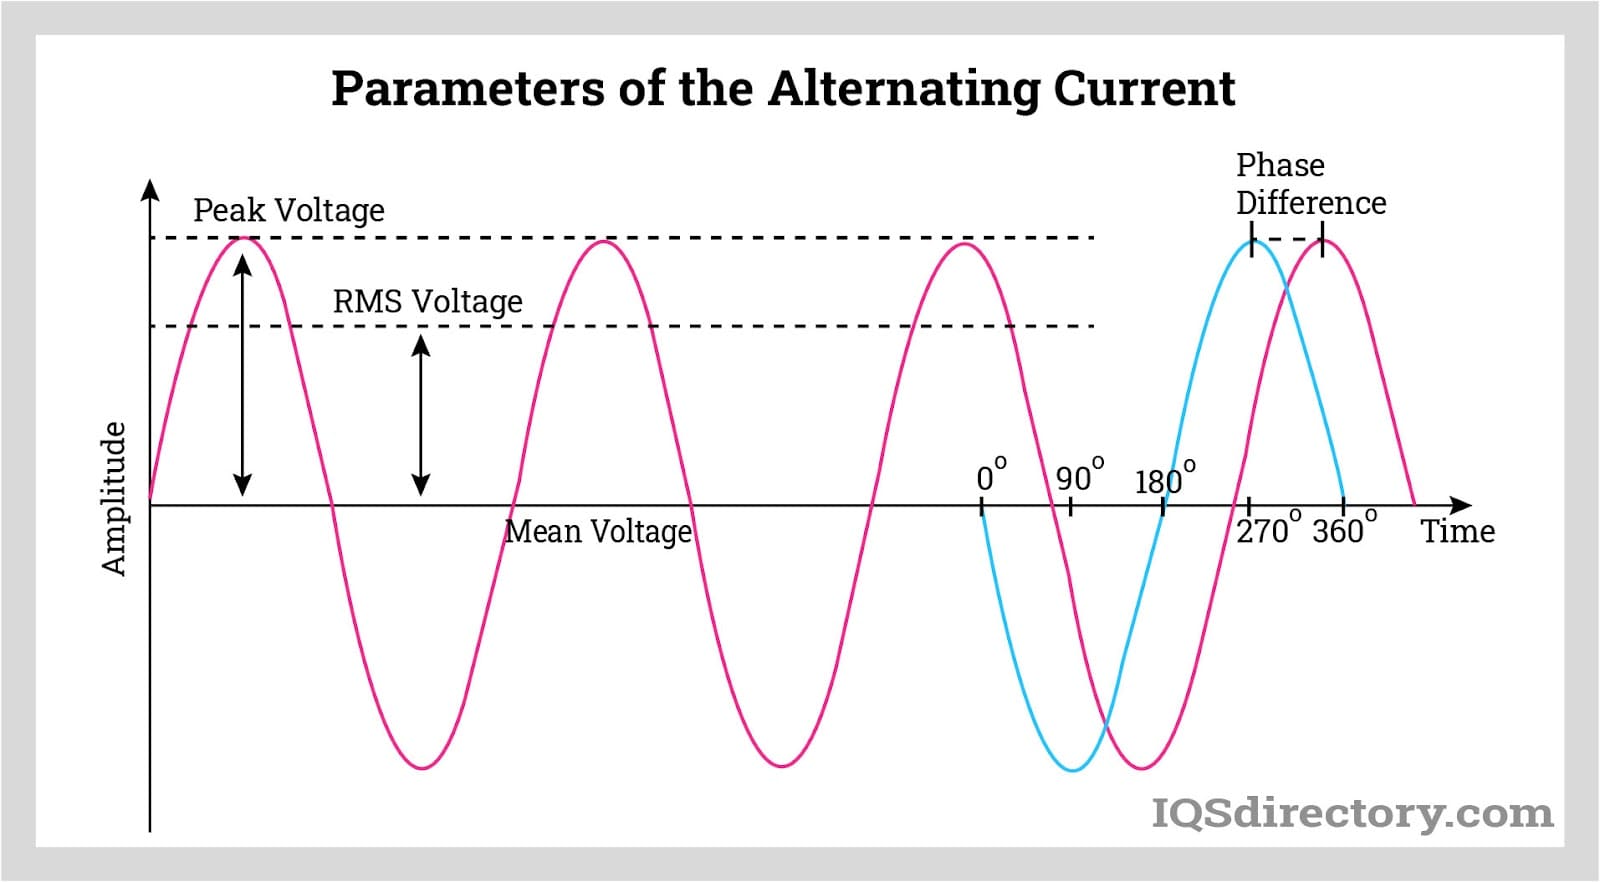 Parameters of the Alternating Current (Sinusoidal Waveform)